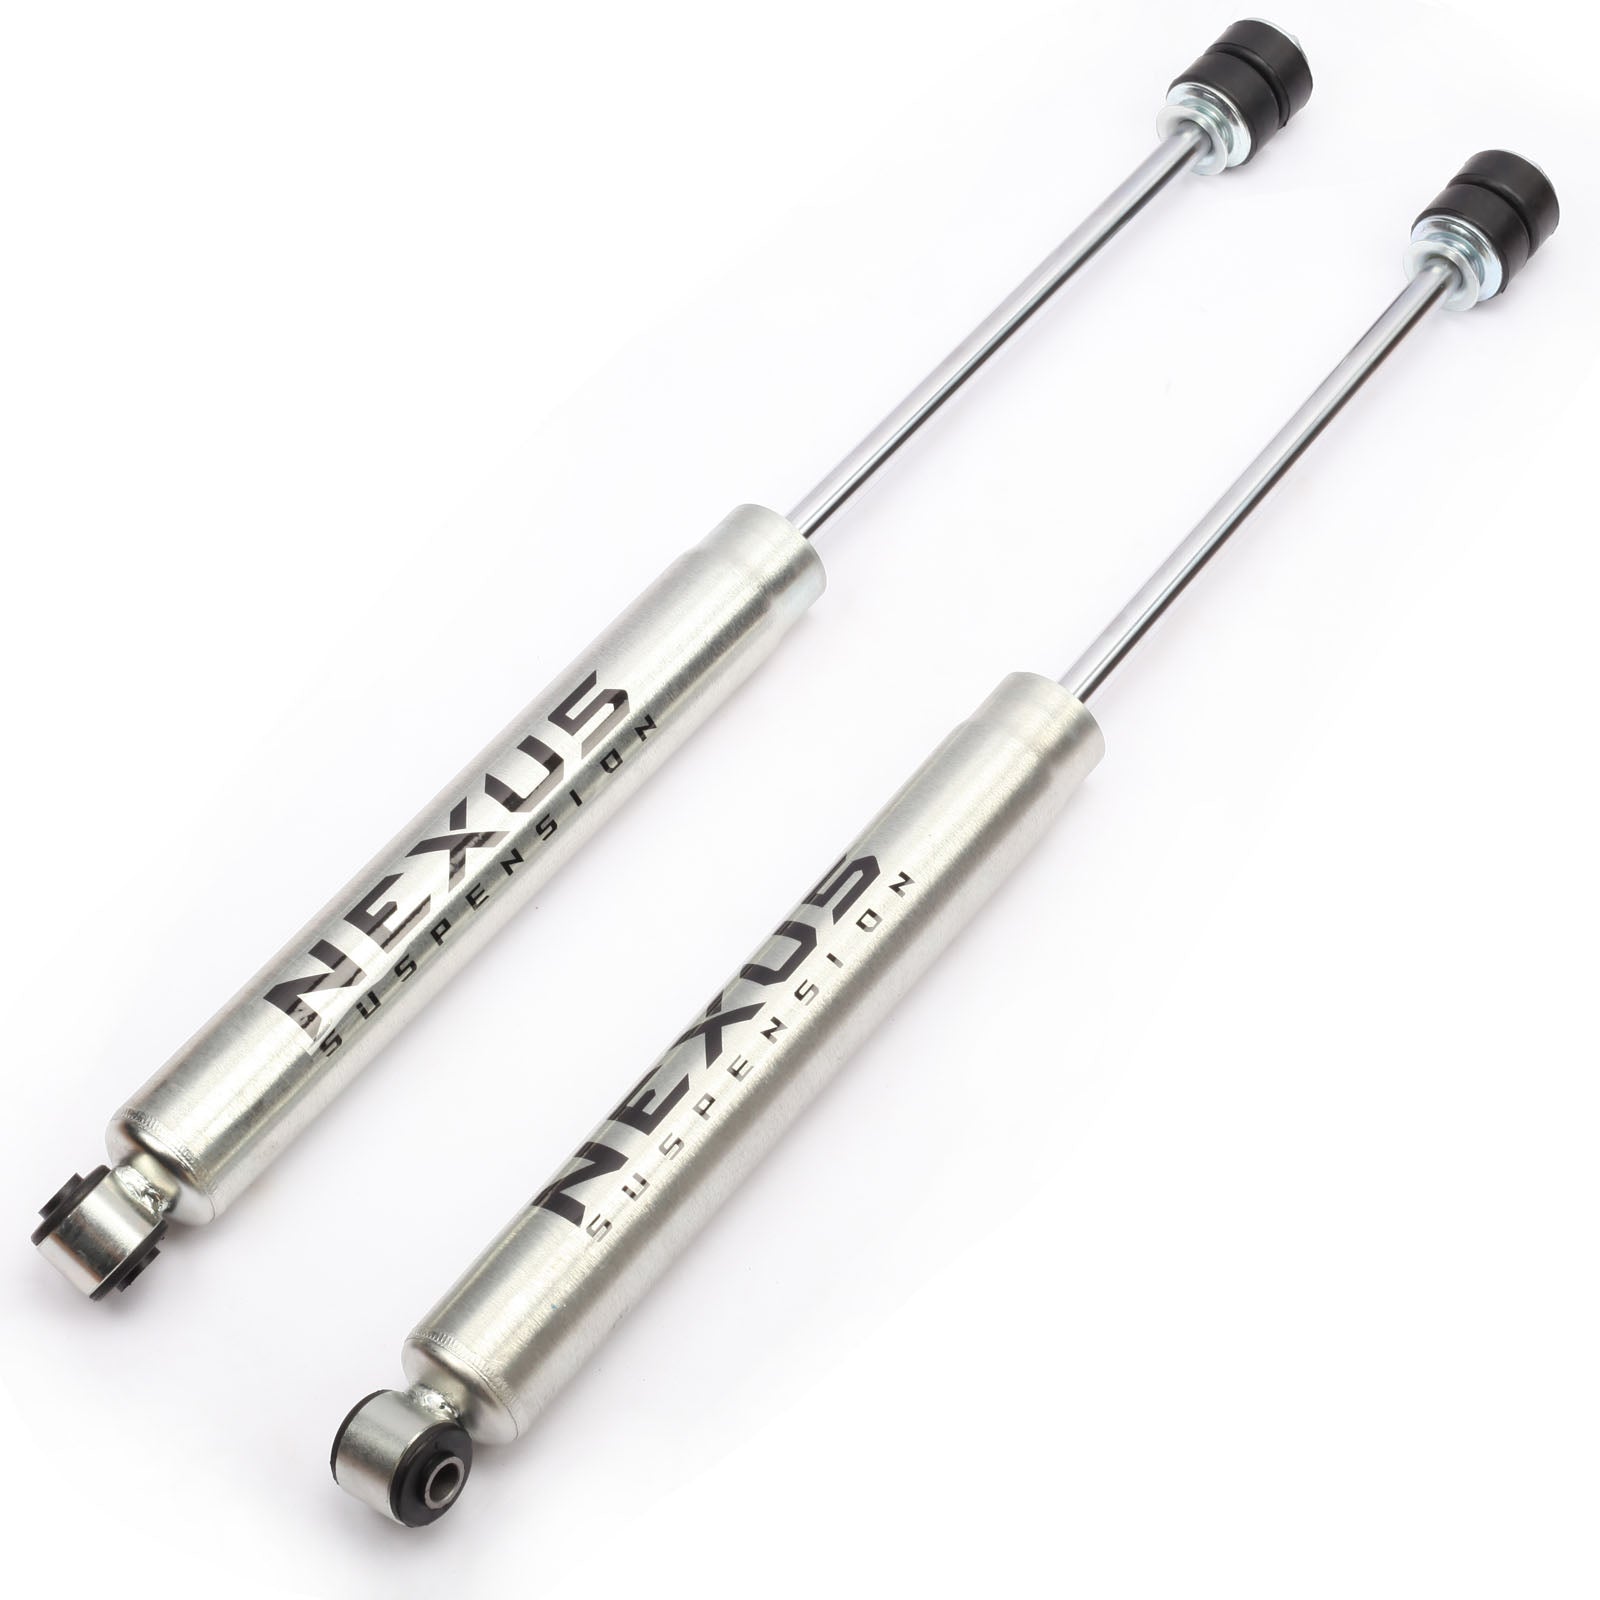 NEXUS SUSPENSION 4-5.5 Inch Lift Rear Shock Absorber for RAM 1500 2WD/4WD (2019-2022),Zinc Plated Coating,Pair Pack